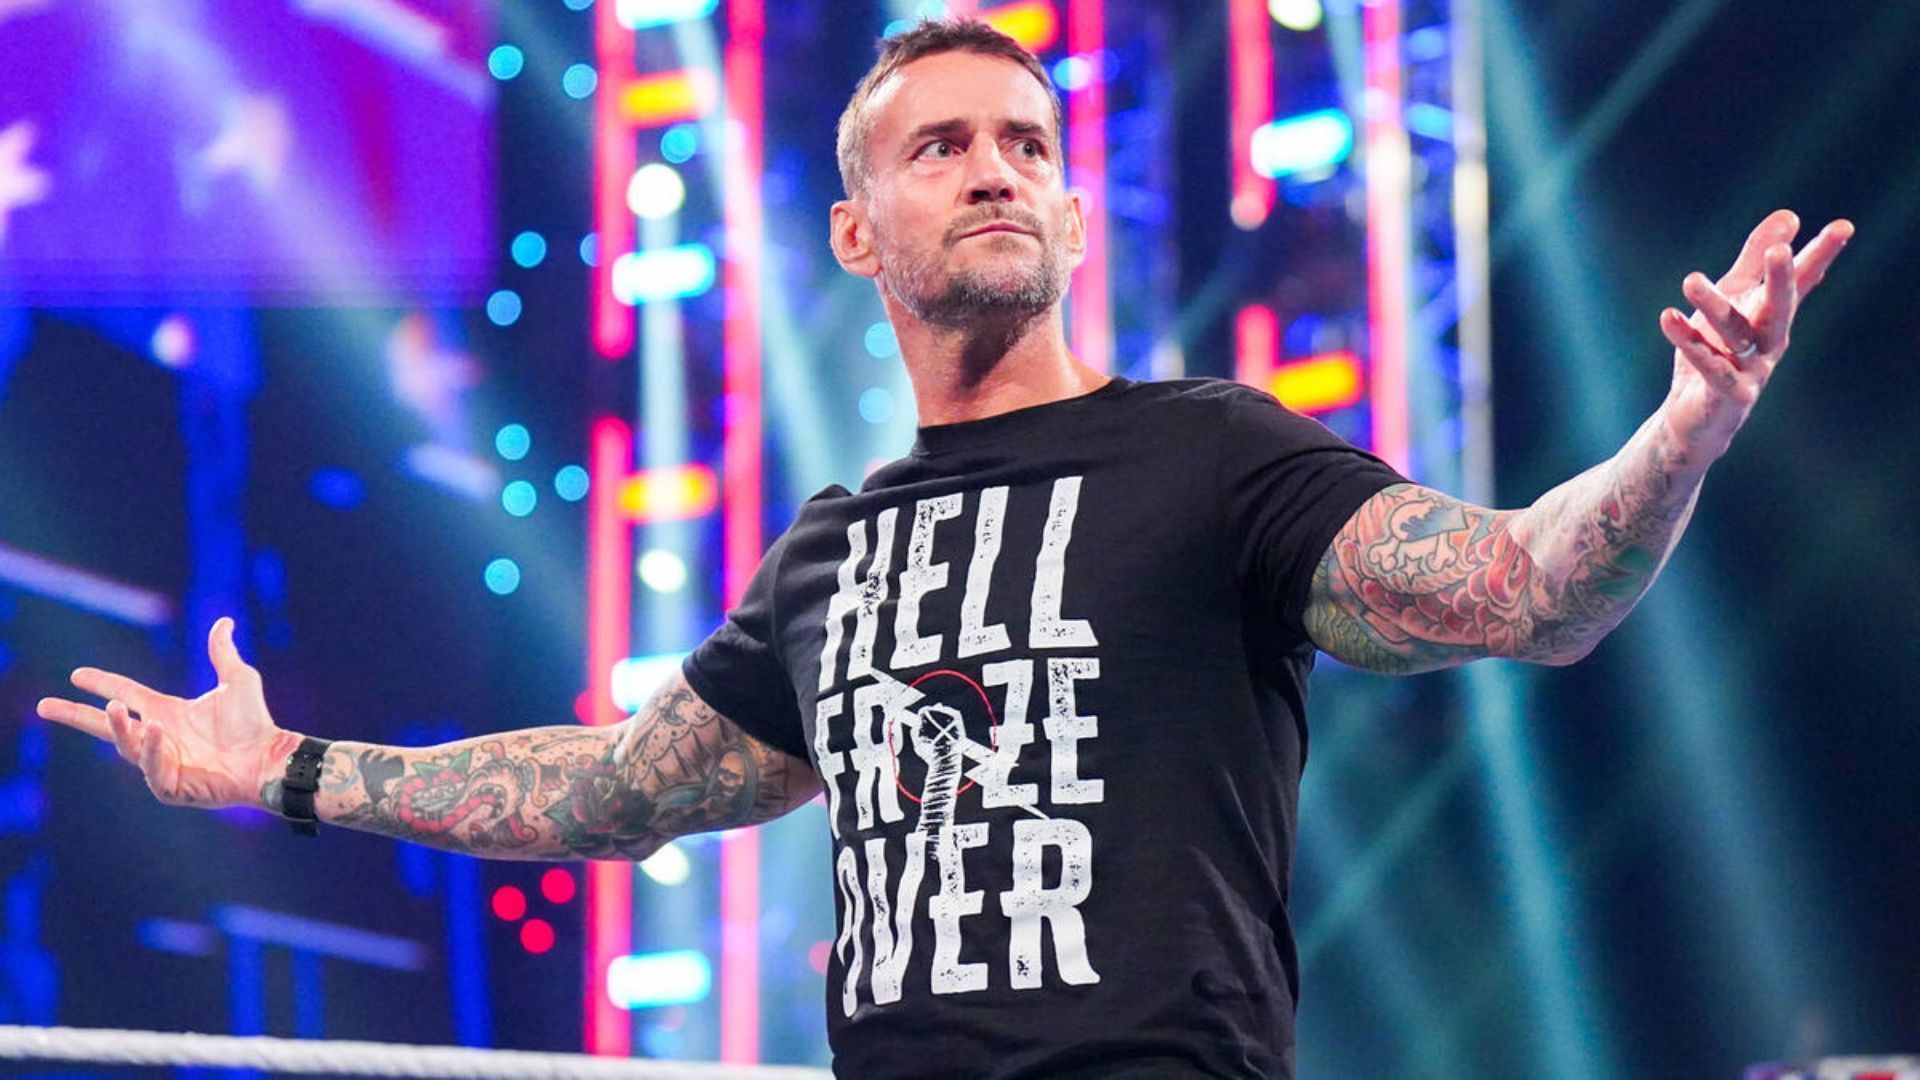 CM Punk is soon expected to make his in-ring return